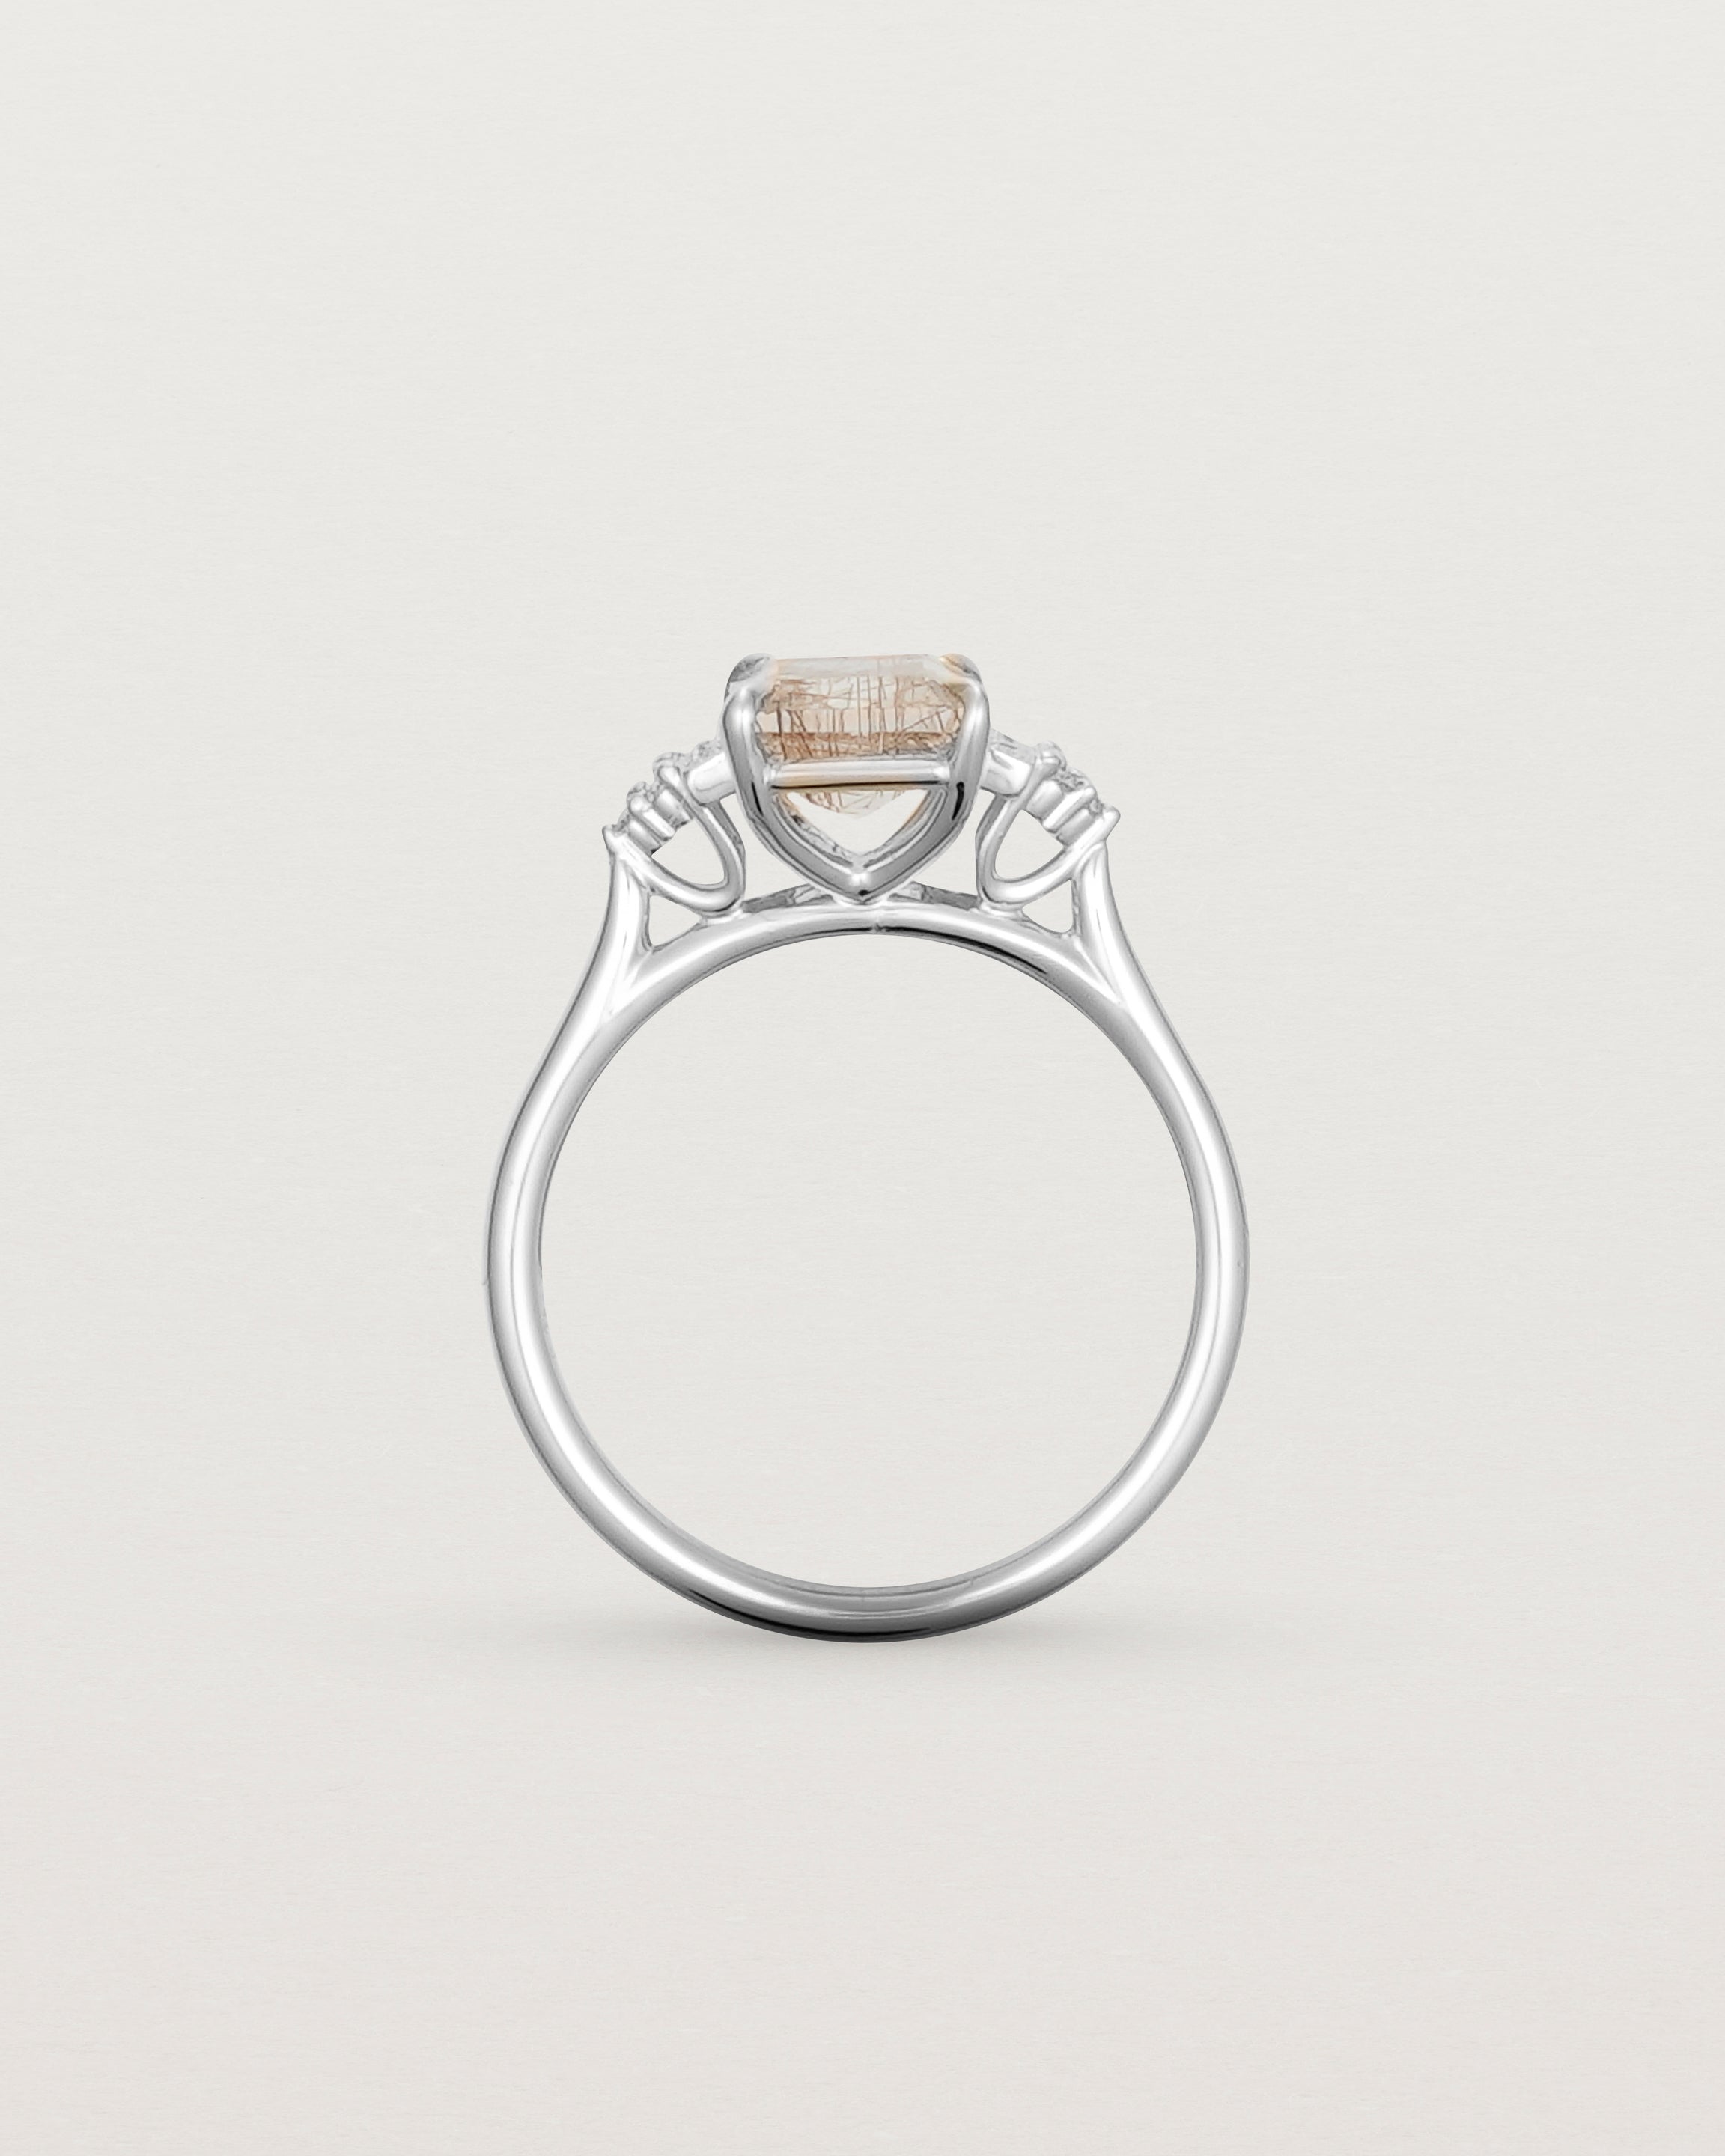 Standing view of the Elodie Ring featuring a emerald cut rutilated quartz in white gold